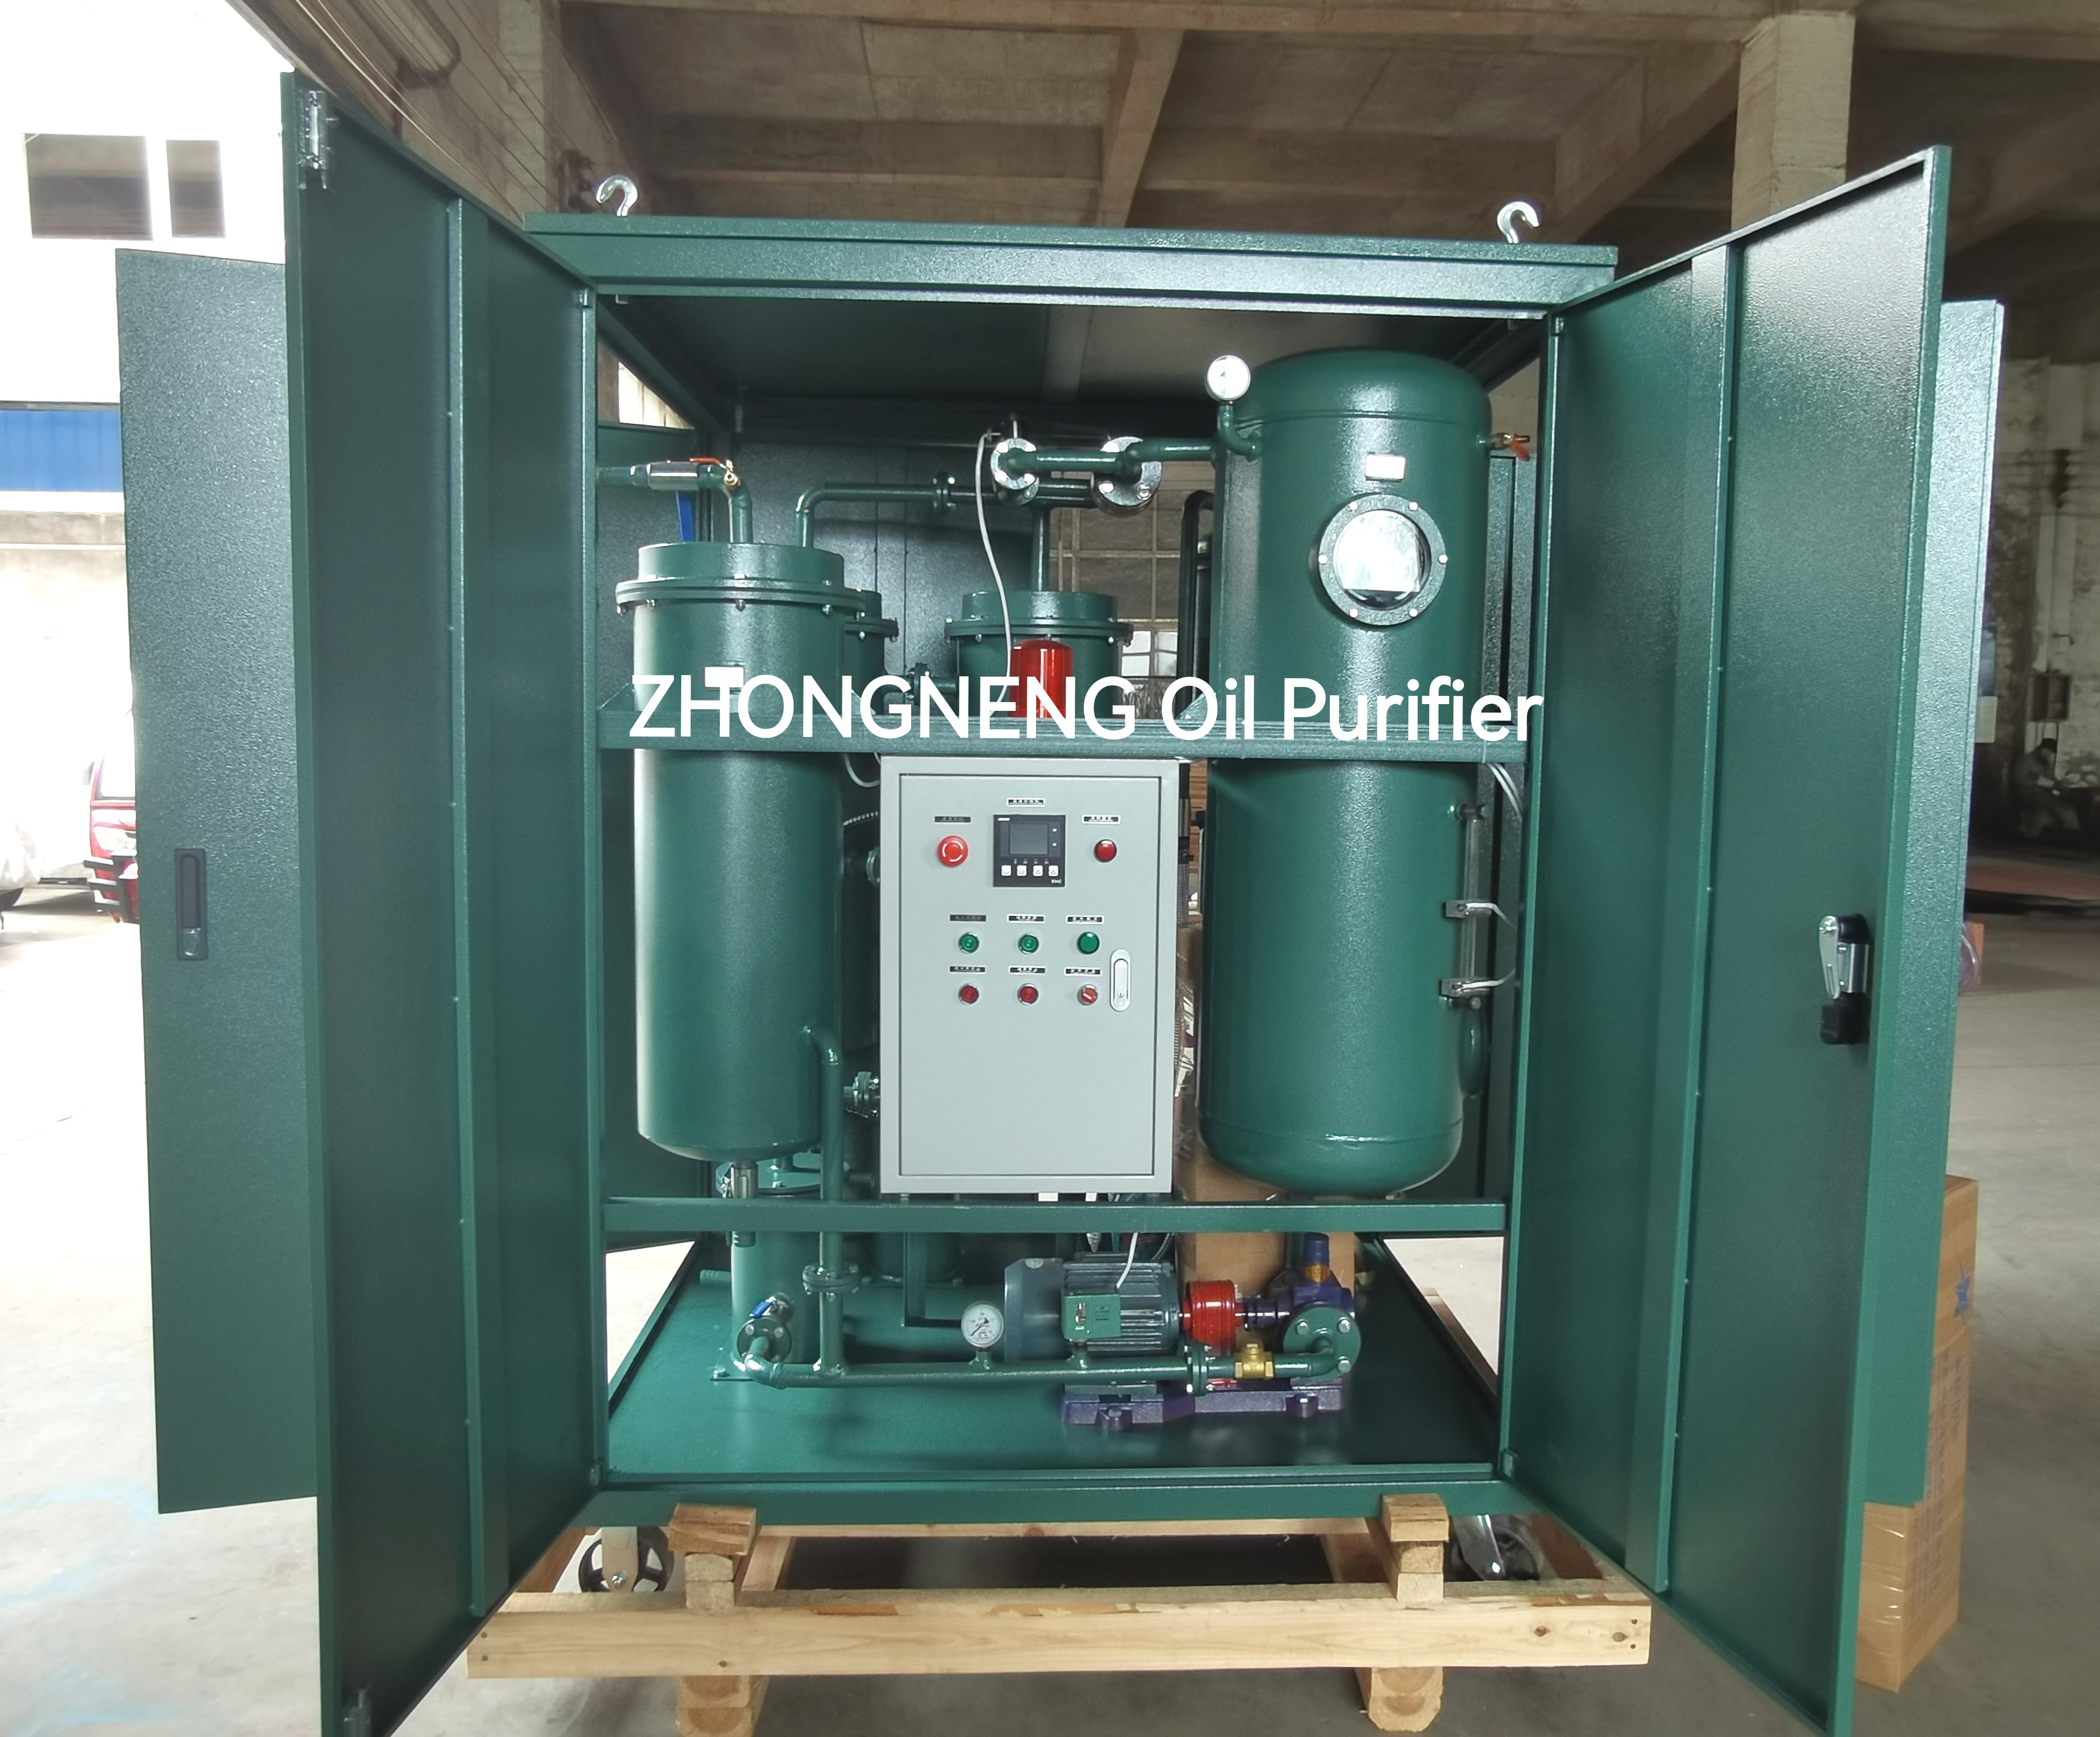 Updated TY-30 Vacuum Turbine Oil Purifier Is Ready for Ship